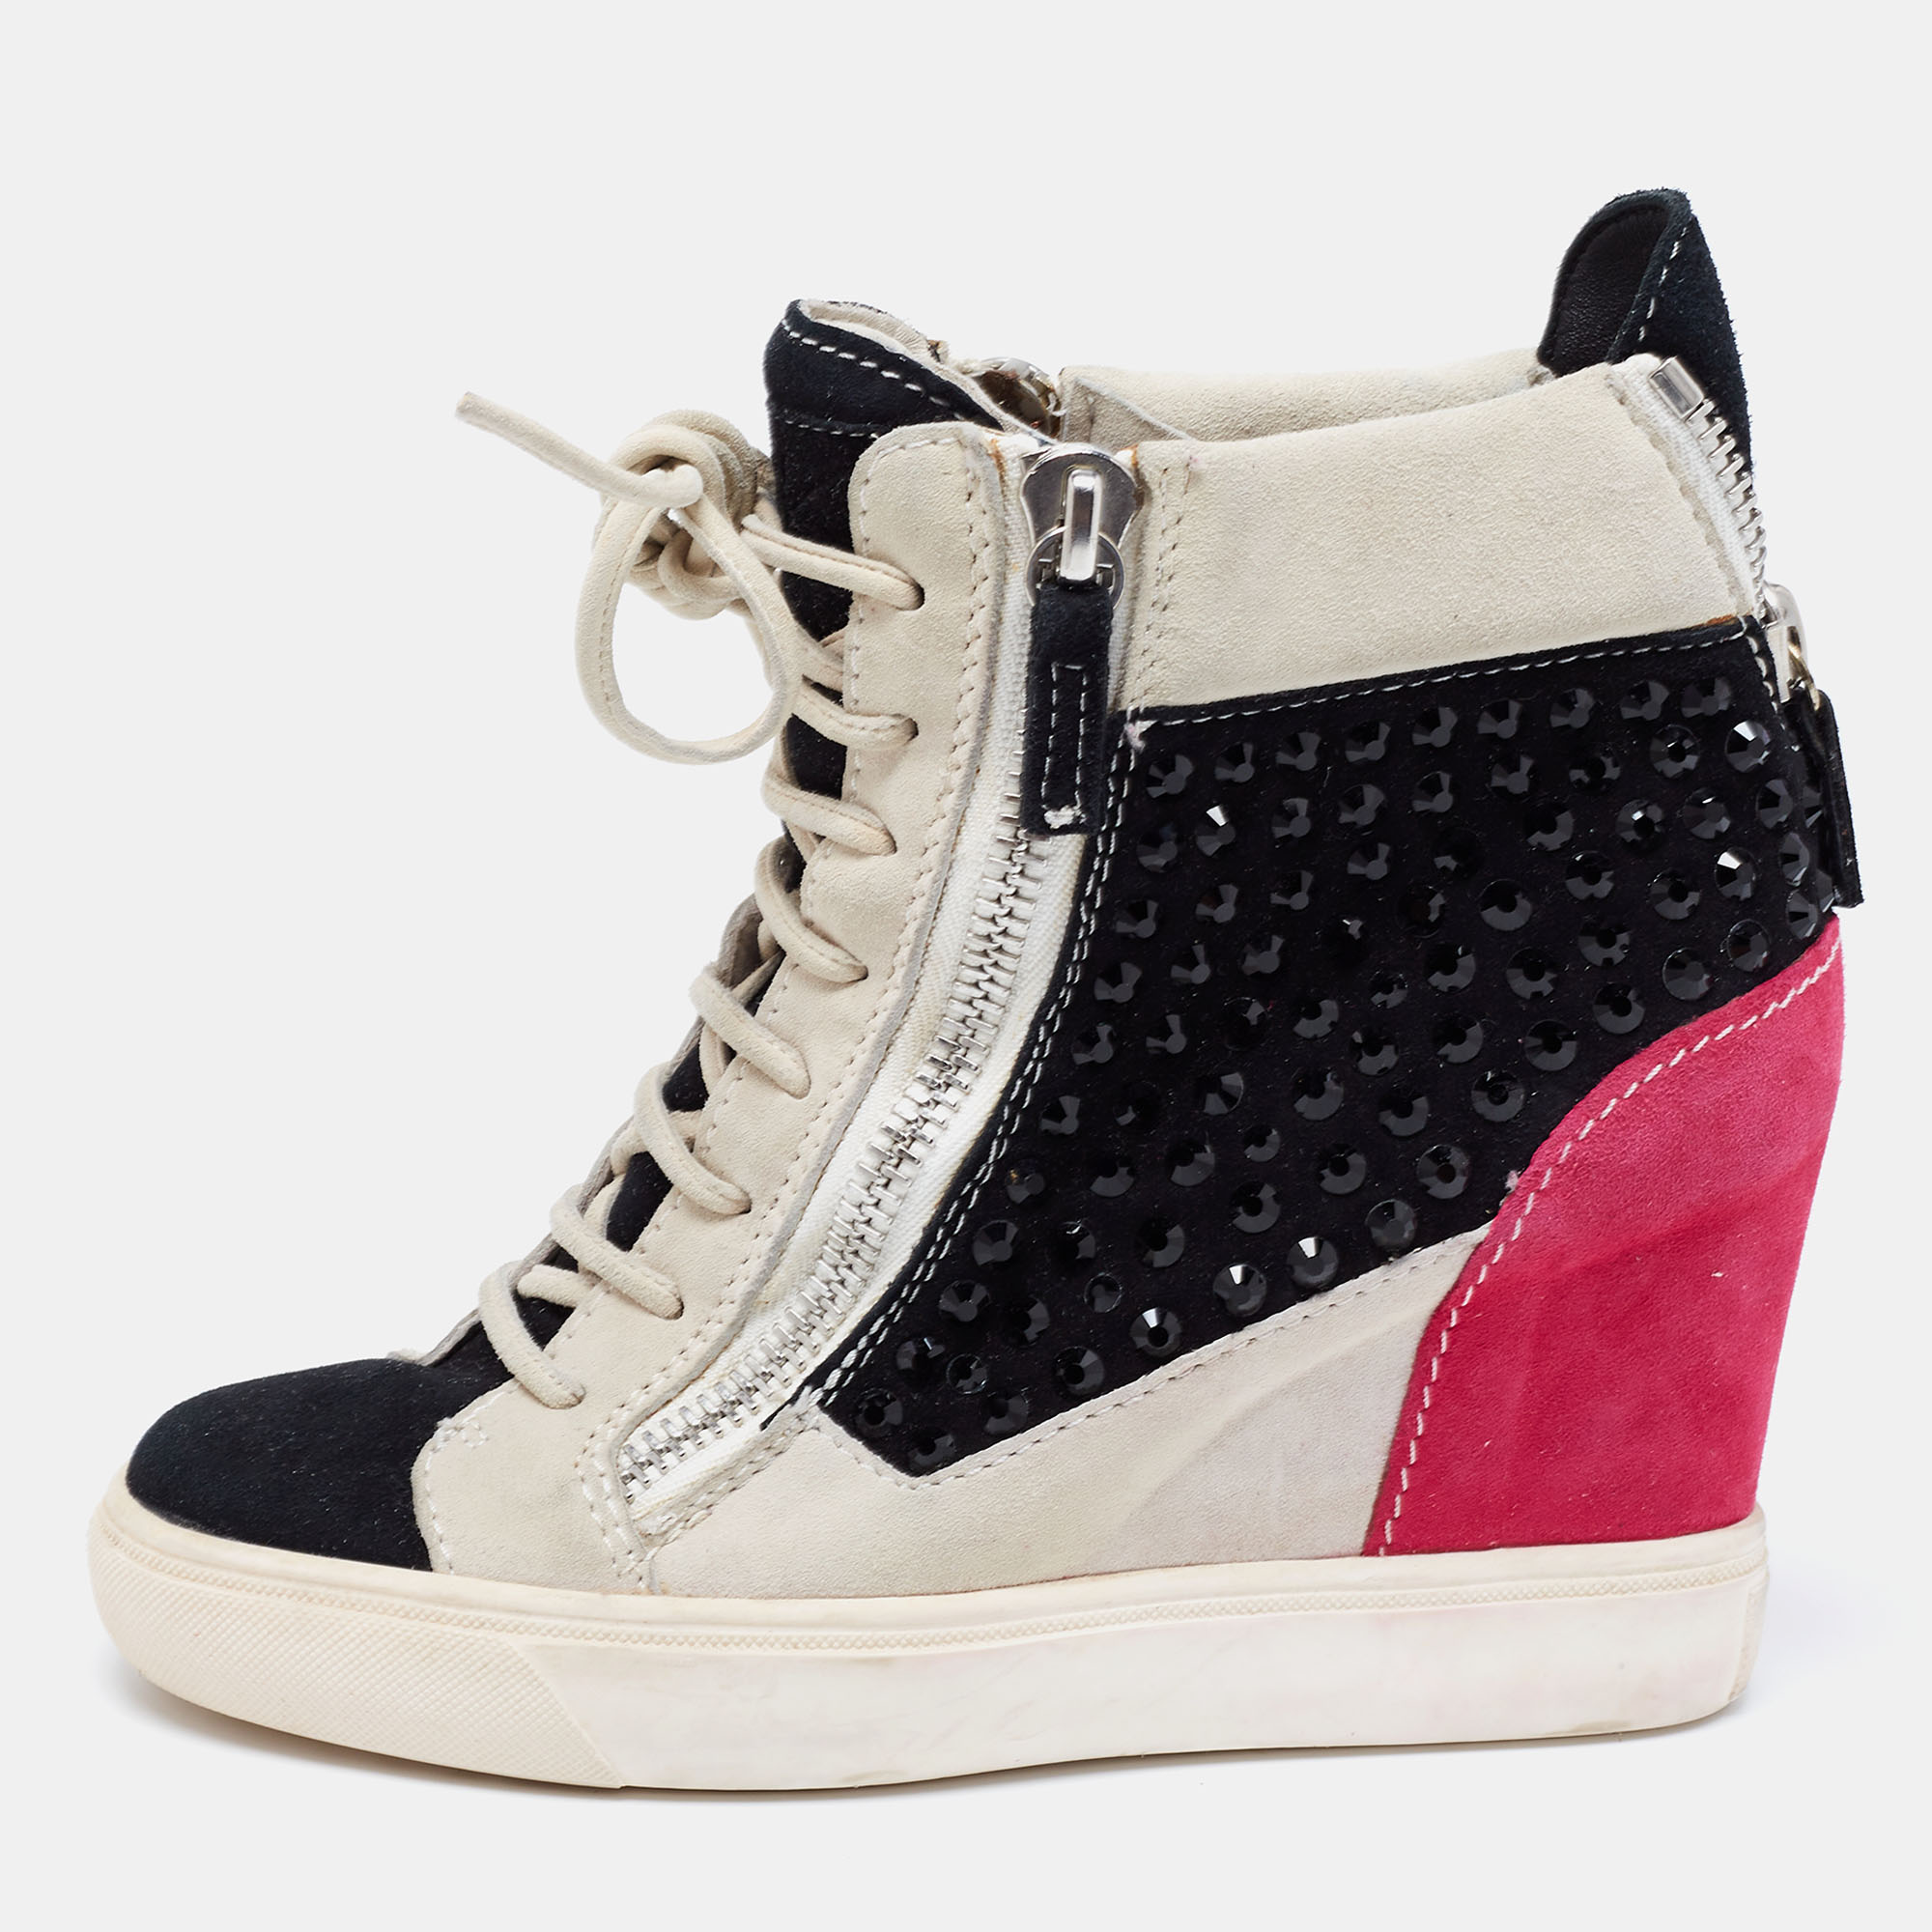 

Giuseppe Zanotti Multicolor Crystal Embellished Suede Wedge Sneakers Size